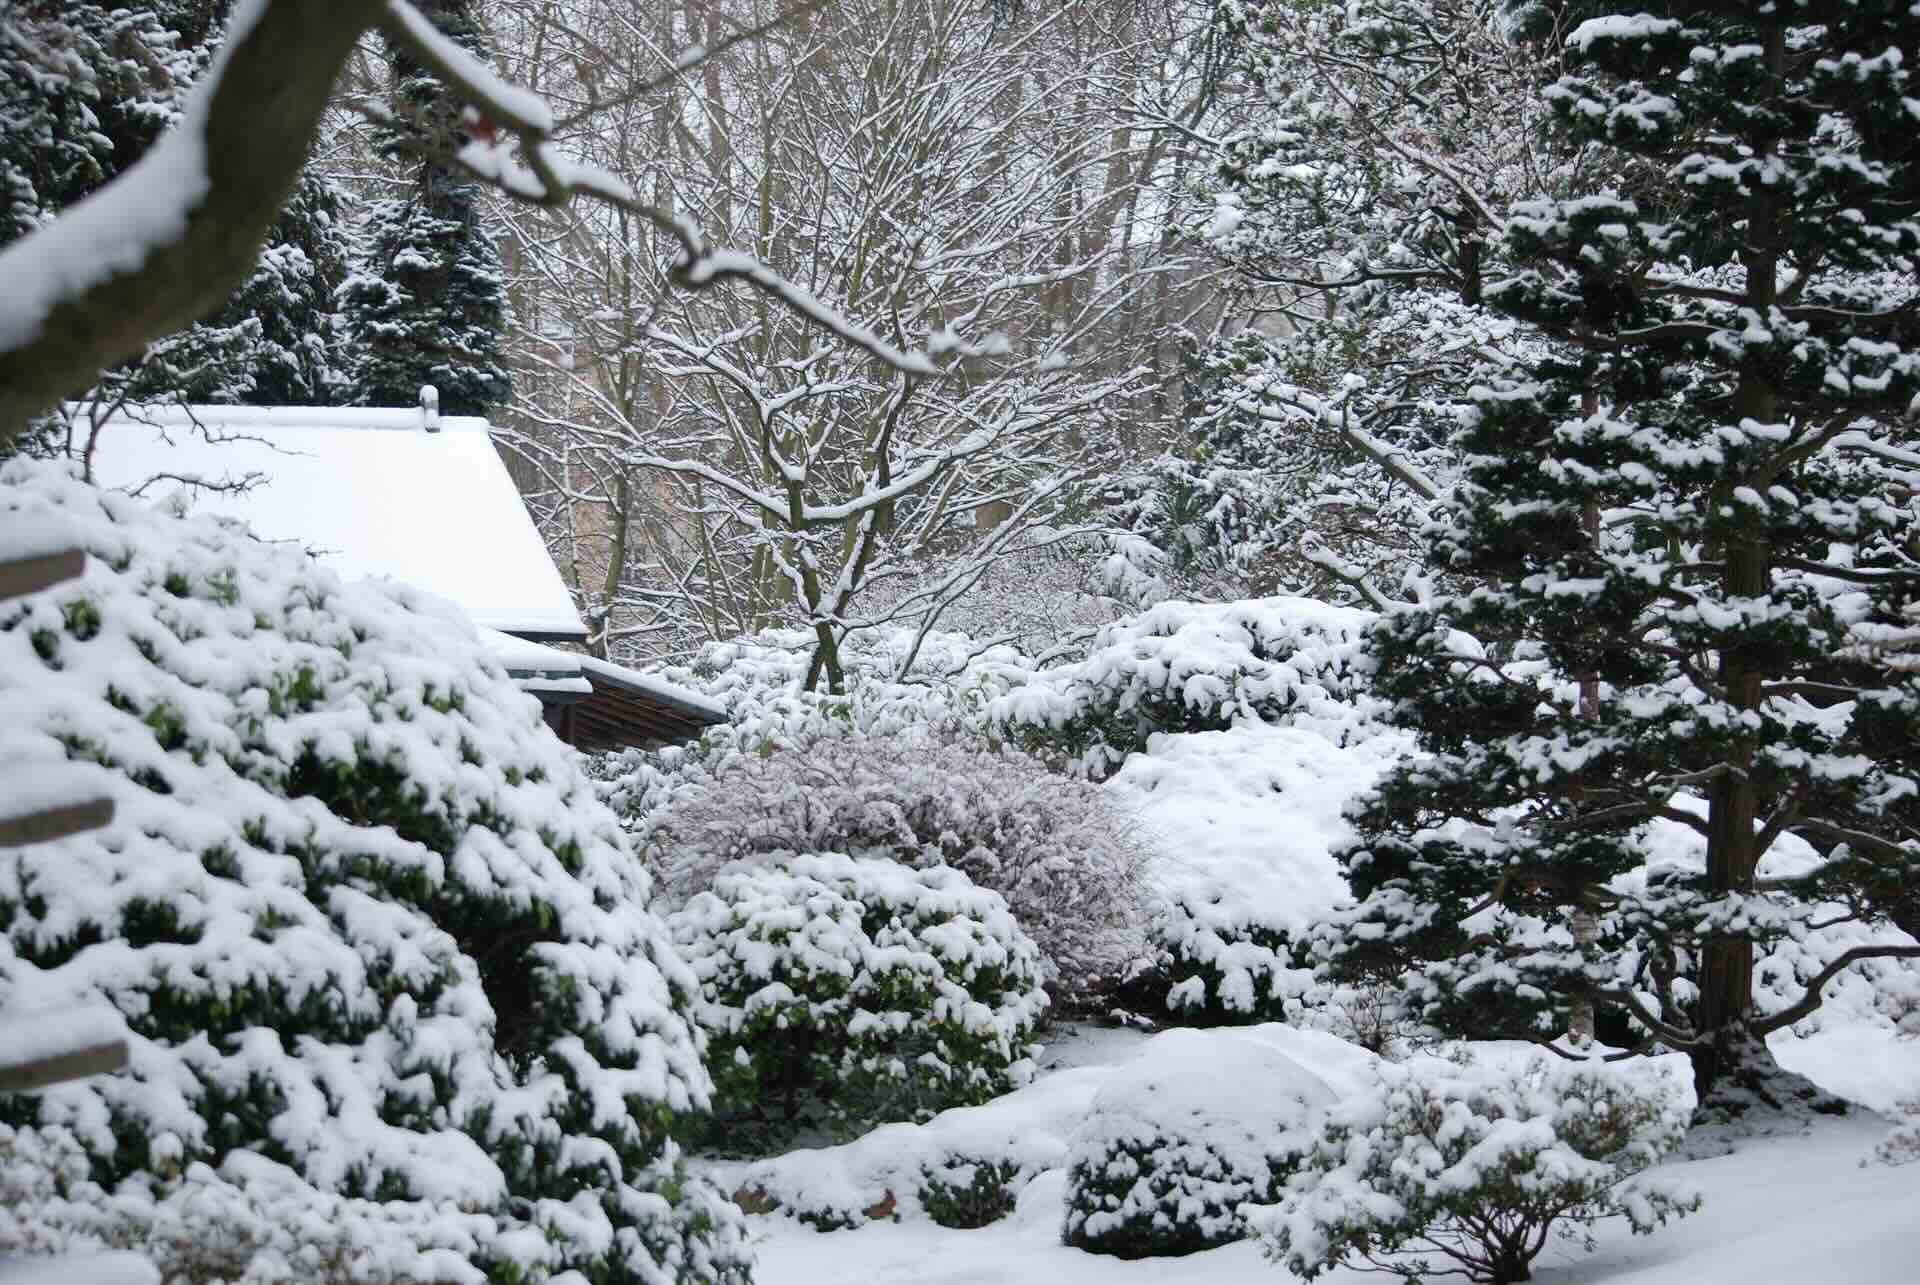 How To View Greenery During Winter